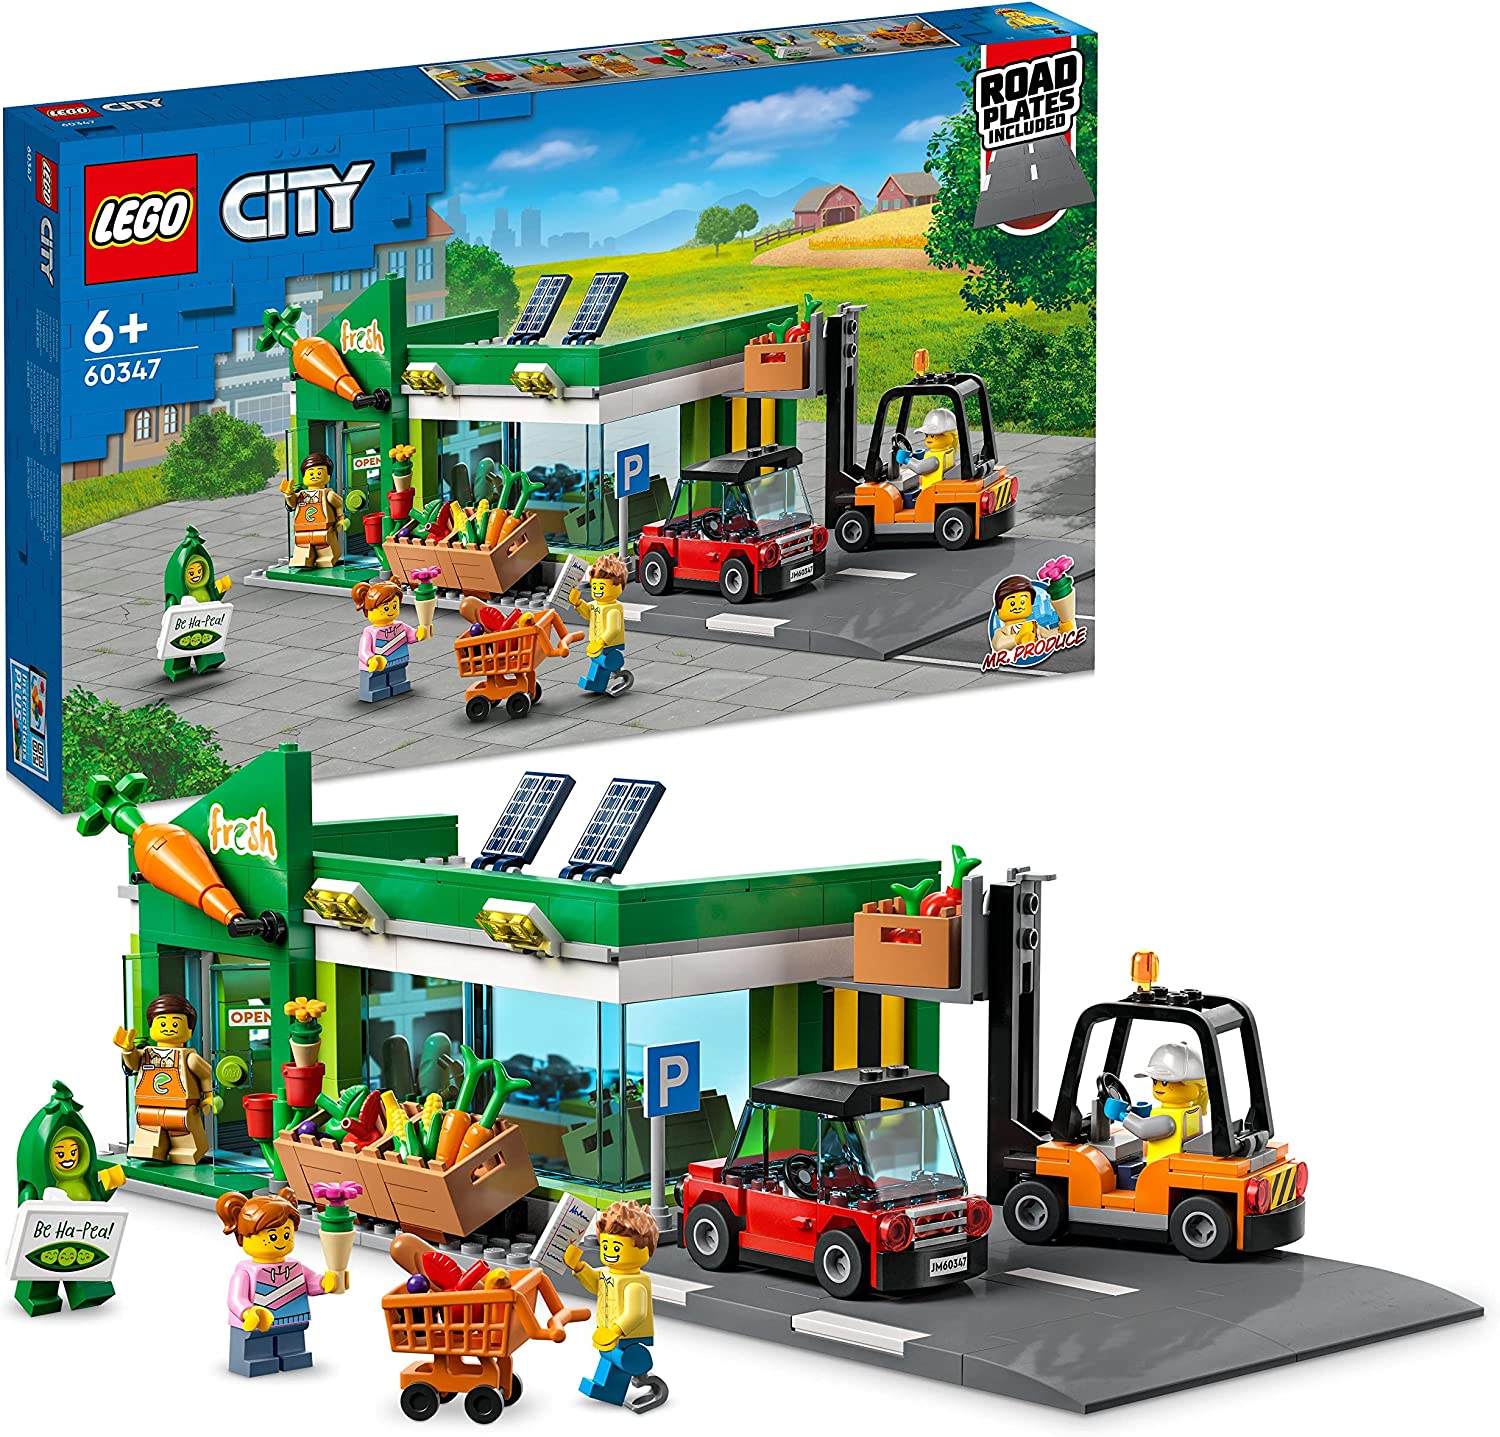 LEGO 60347 City Supermarket Toy Shop Including Car, Forklift and Road Plate for Children Aged 6 Years and Up TV Series